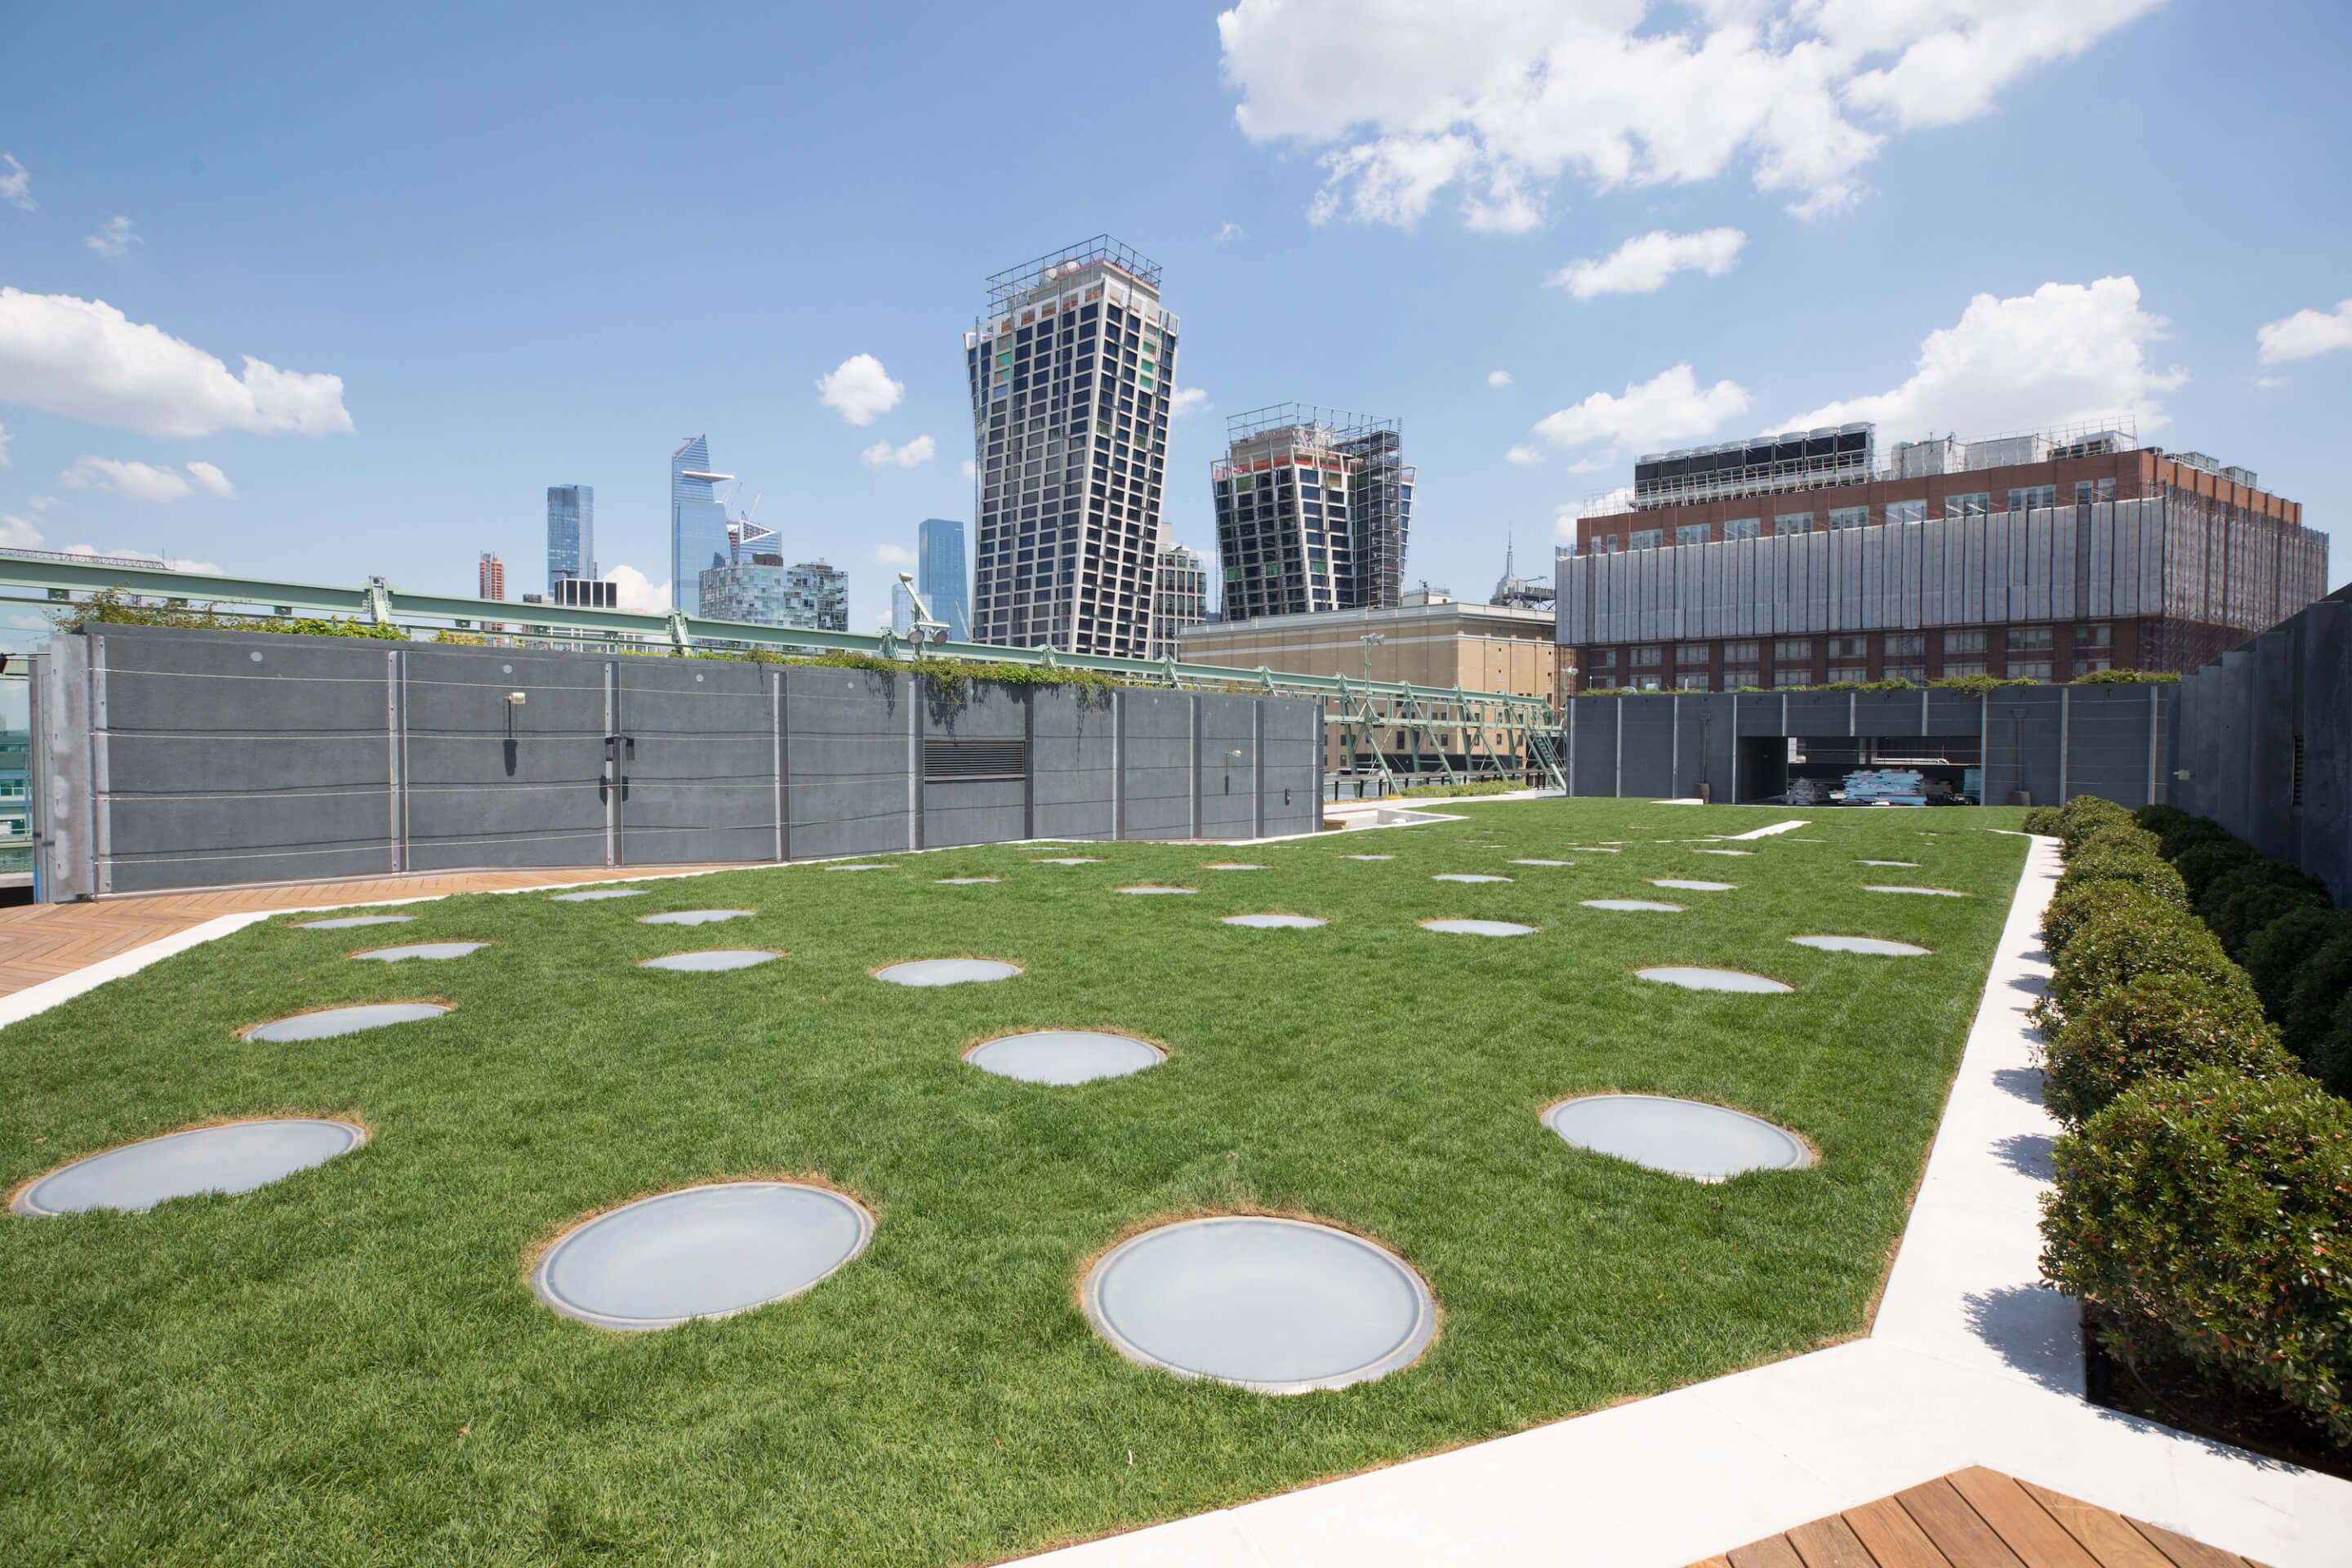 New York City's largest rooftop park opens atop historic Pier 57 in Chelsea